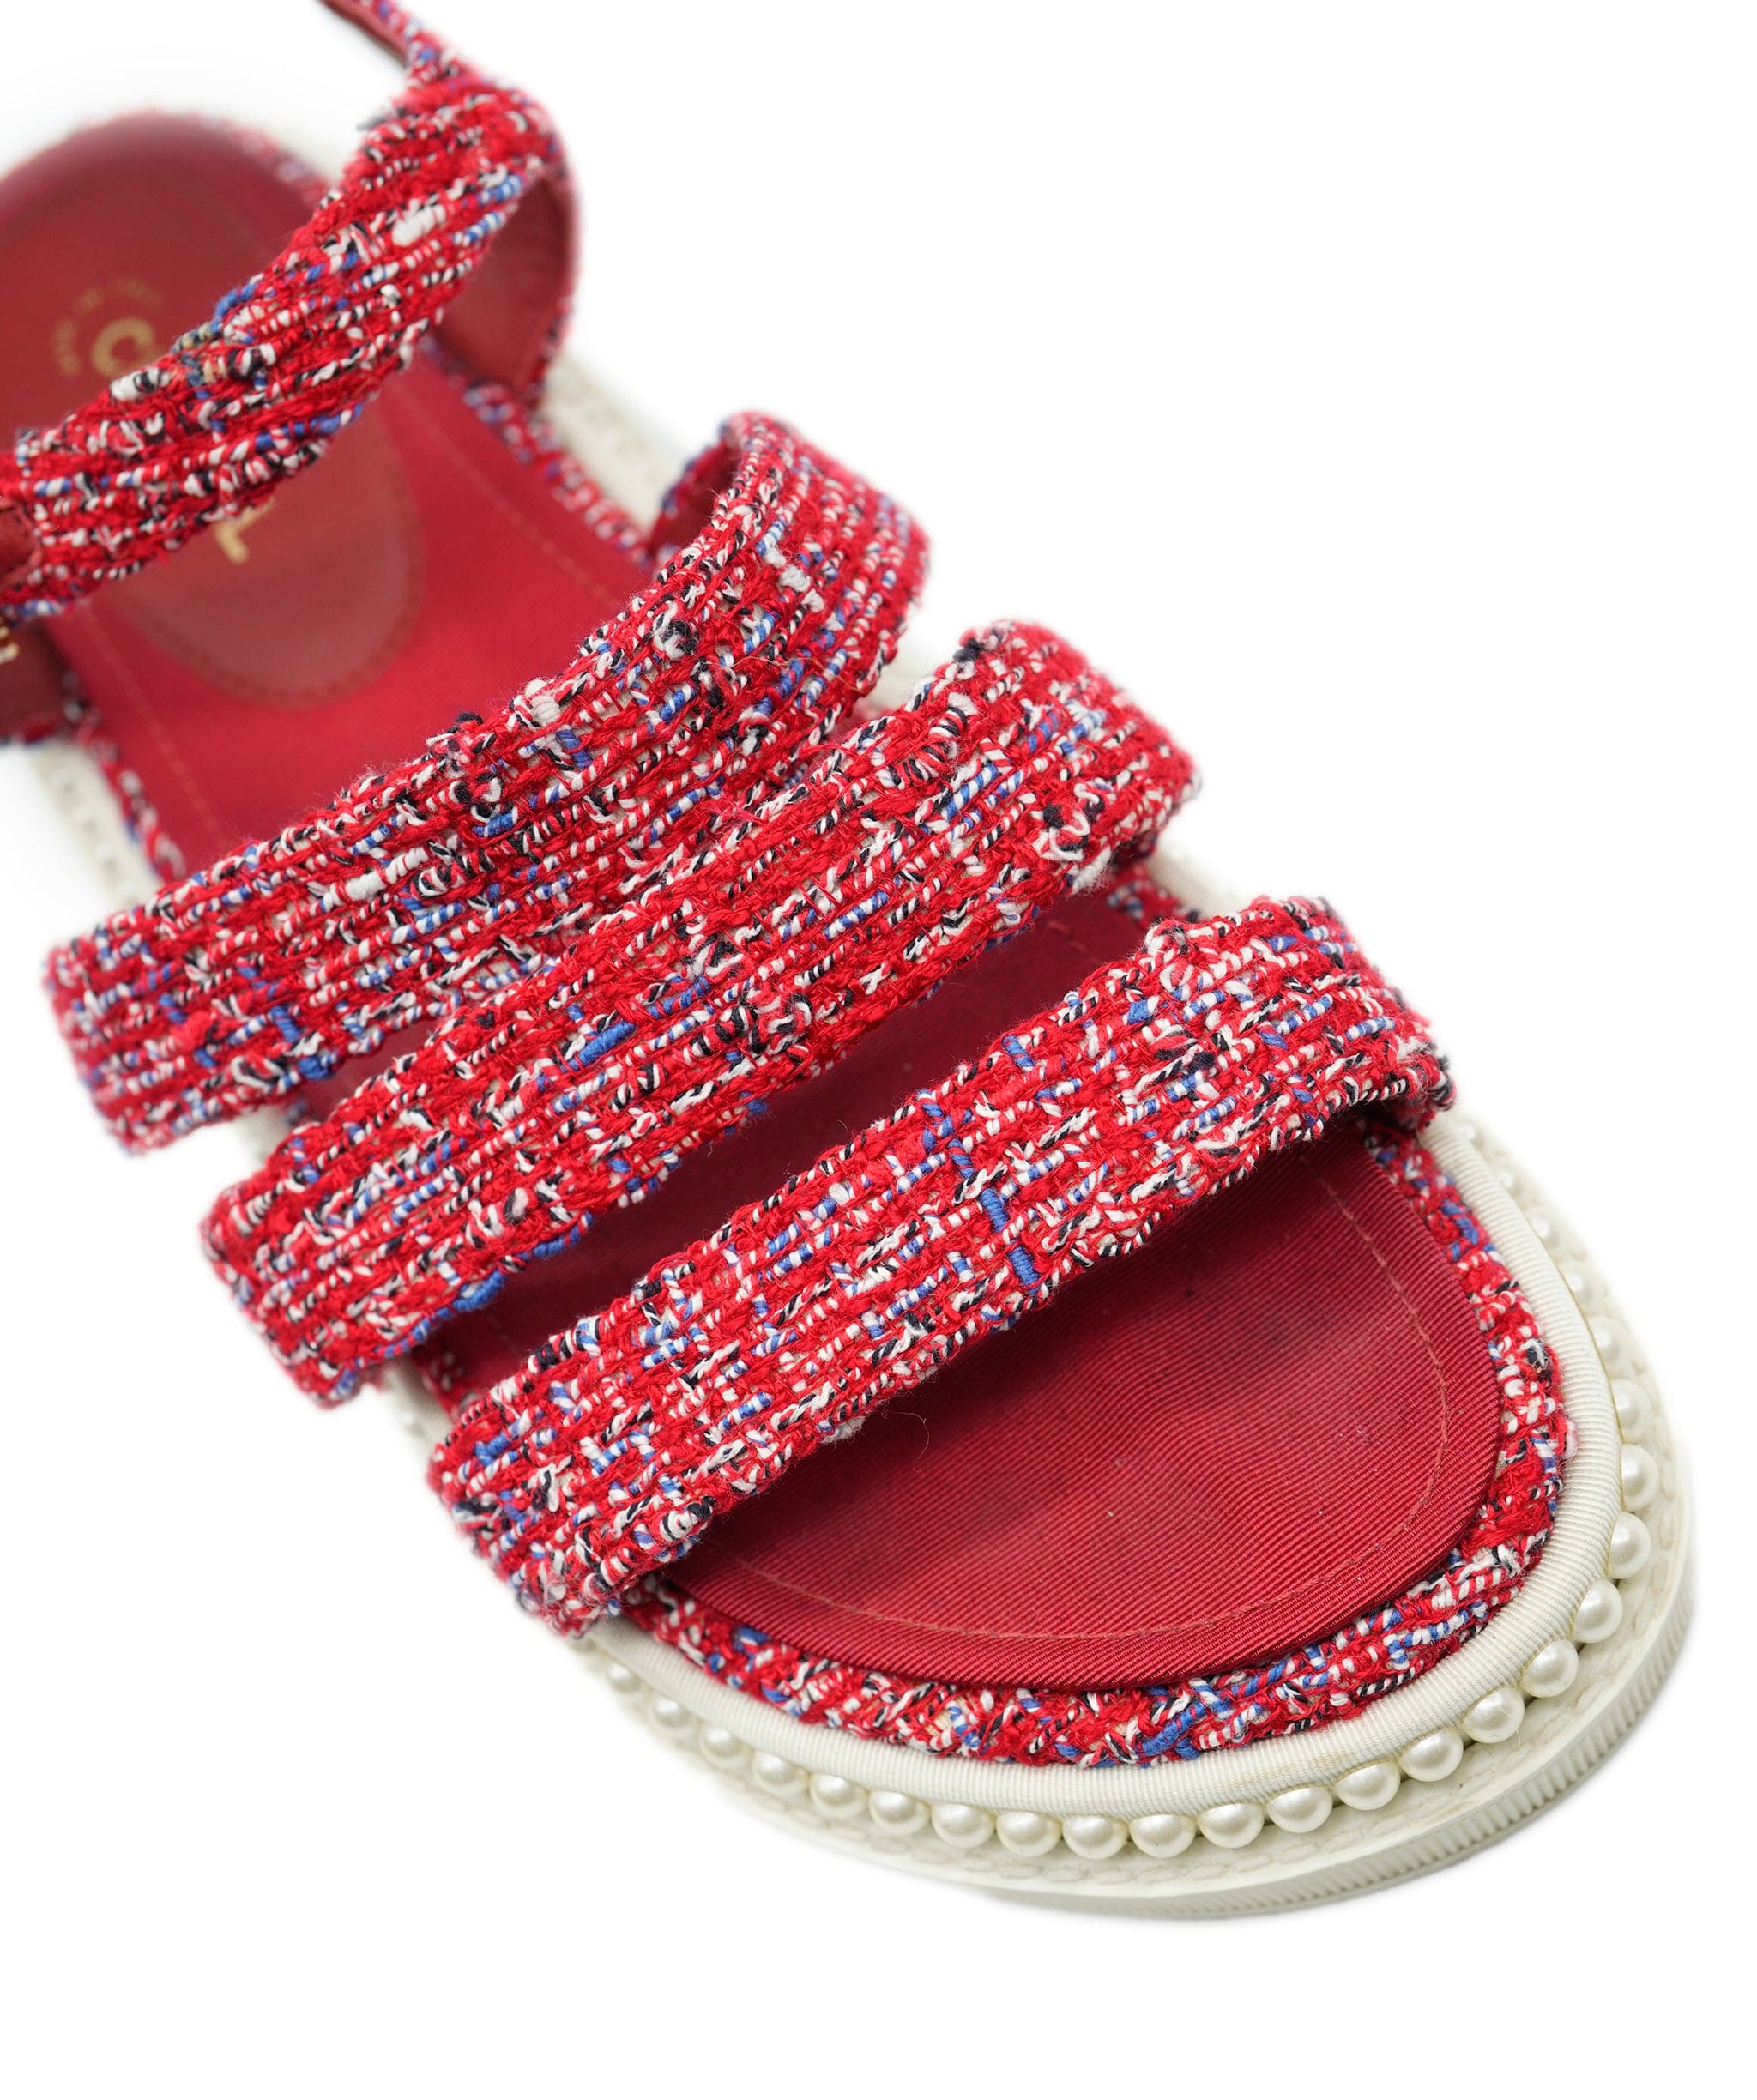 Chanel Chanel Red Sandals  ALC1079